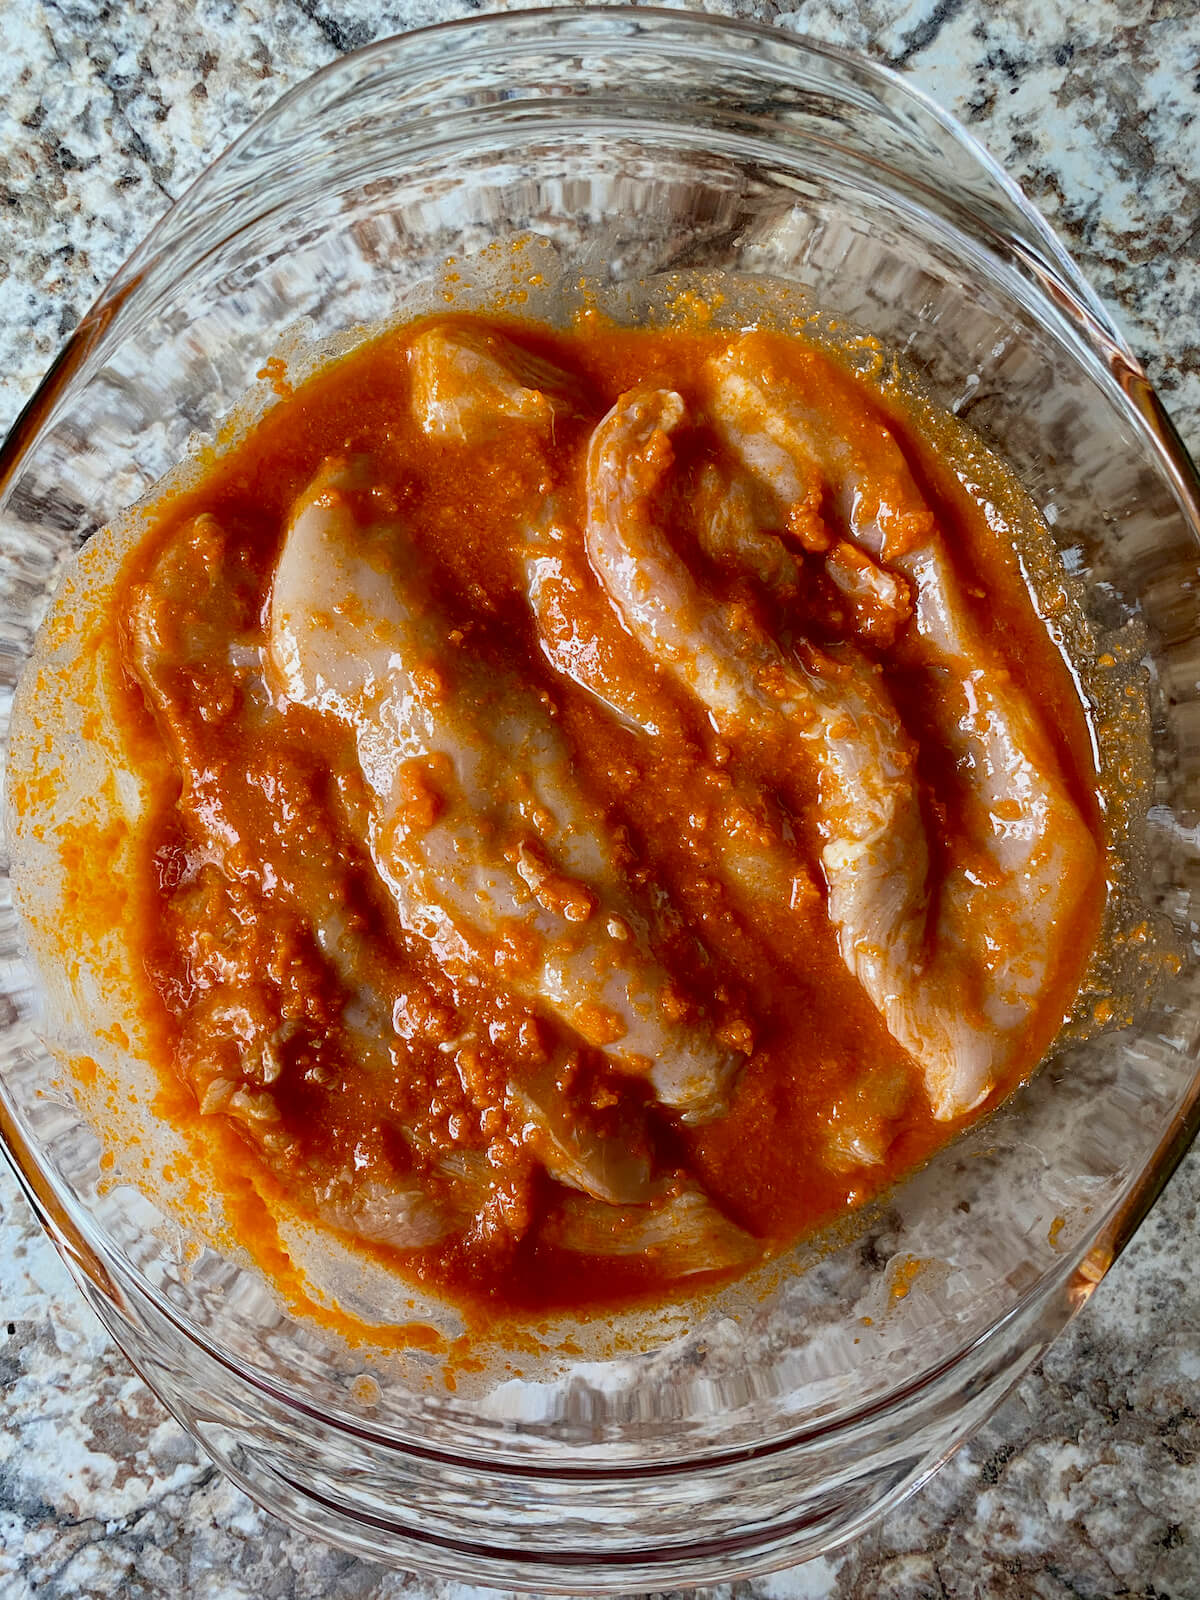 Chicken breasts marinating in homemade buffalo sauce in a glass bowl.